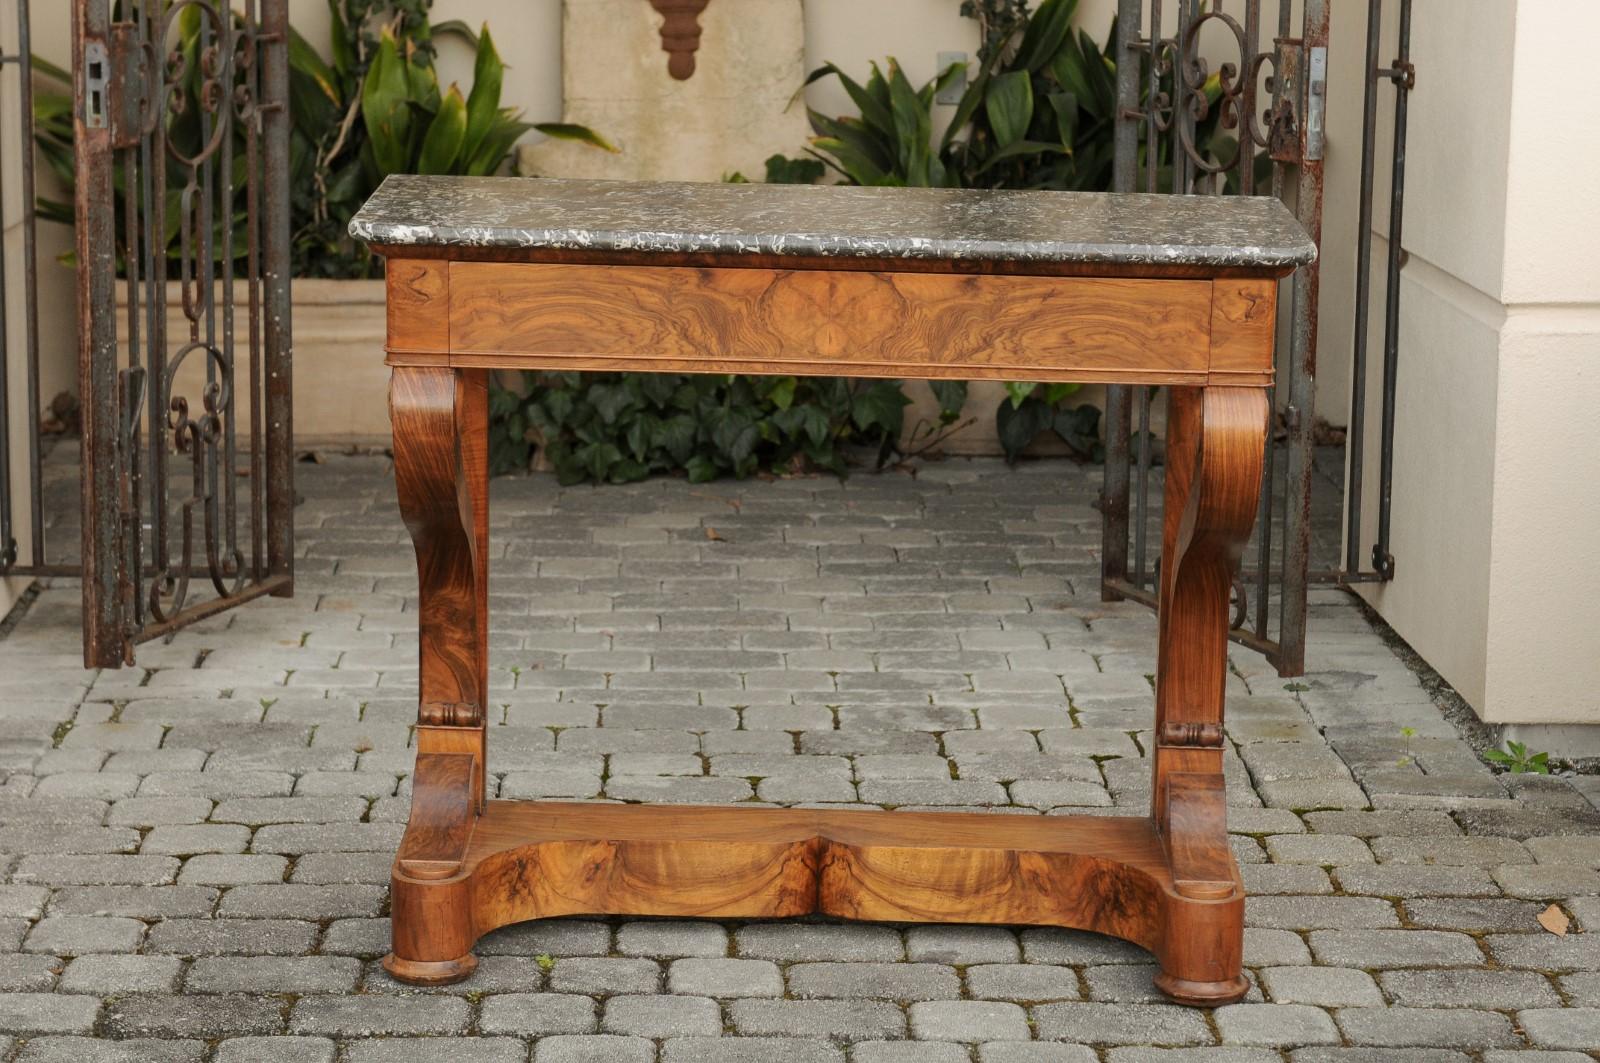 A French Louis-Philippe period walnut console table from the mid-19th century, with grey marble top and single drawer. Born in France during the reign of King Louis-Philippe, this exquisite walnut console table features a rectangular marble top with